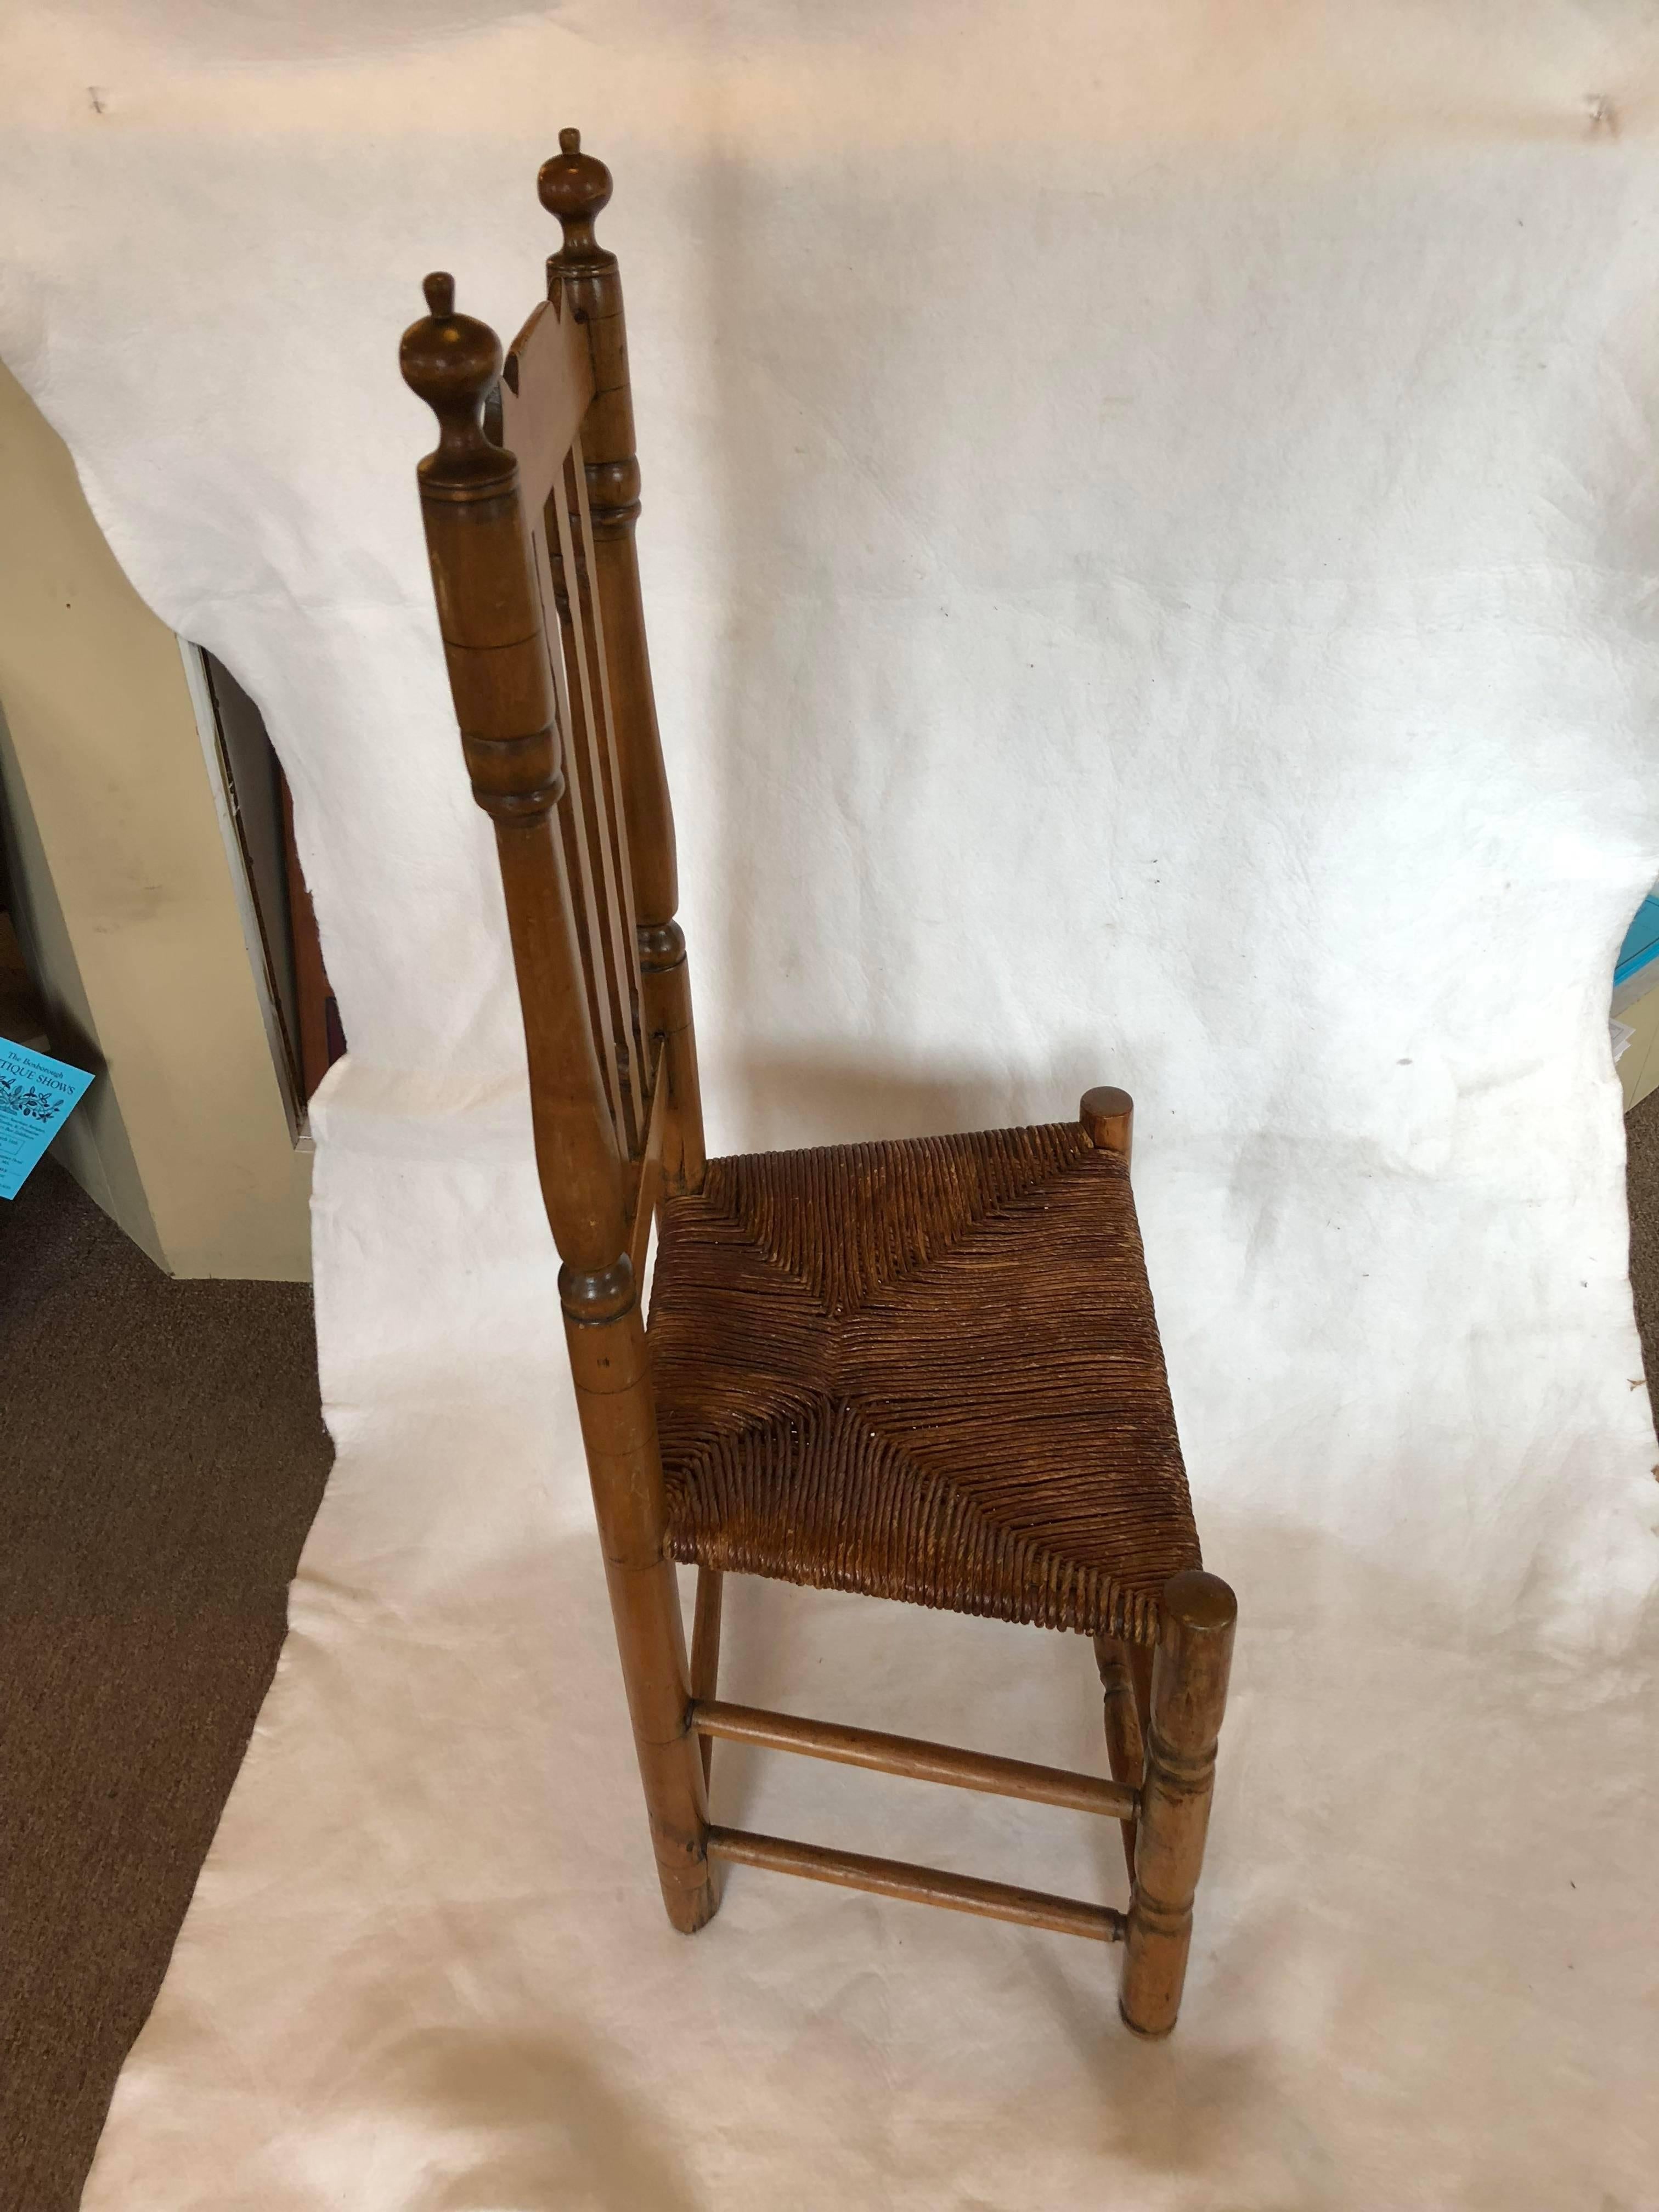 Late 18th century banister back chair, New England. Refinished, paper cord seat.